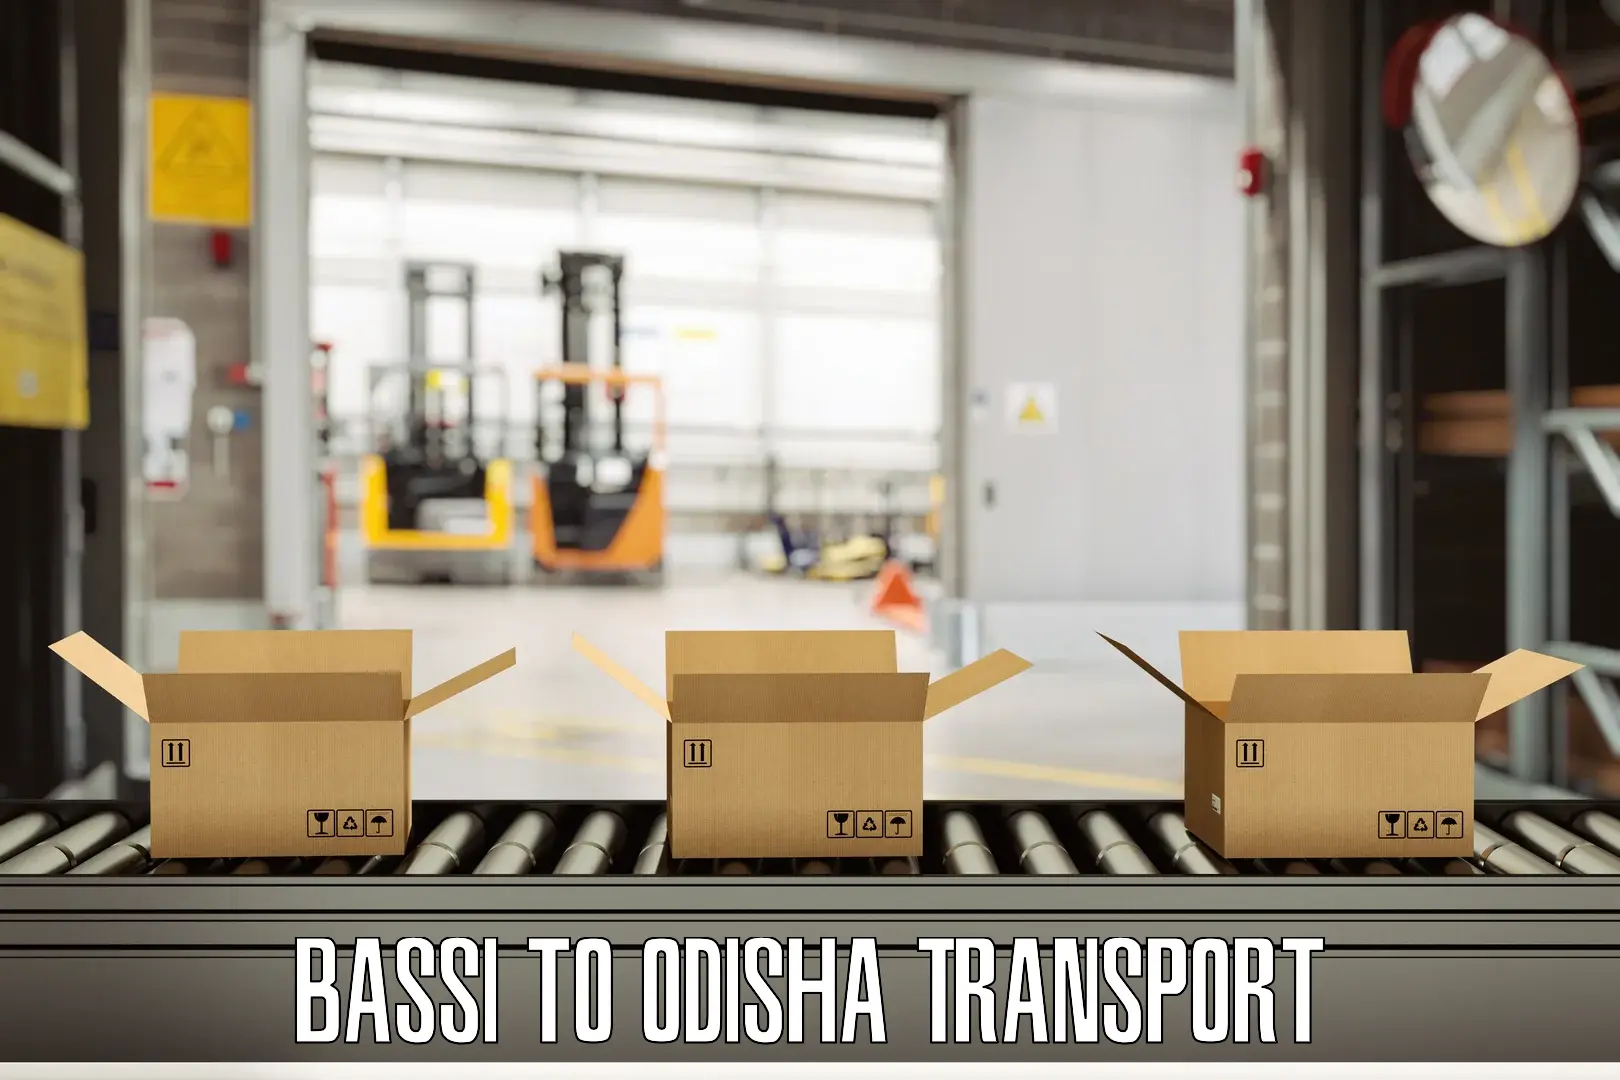 Nearby transport service in Bassi to Odisha